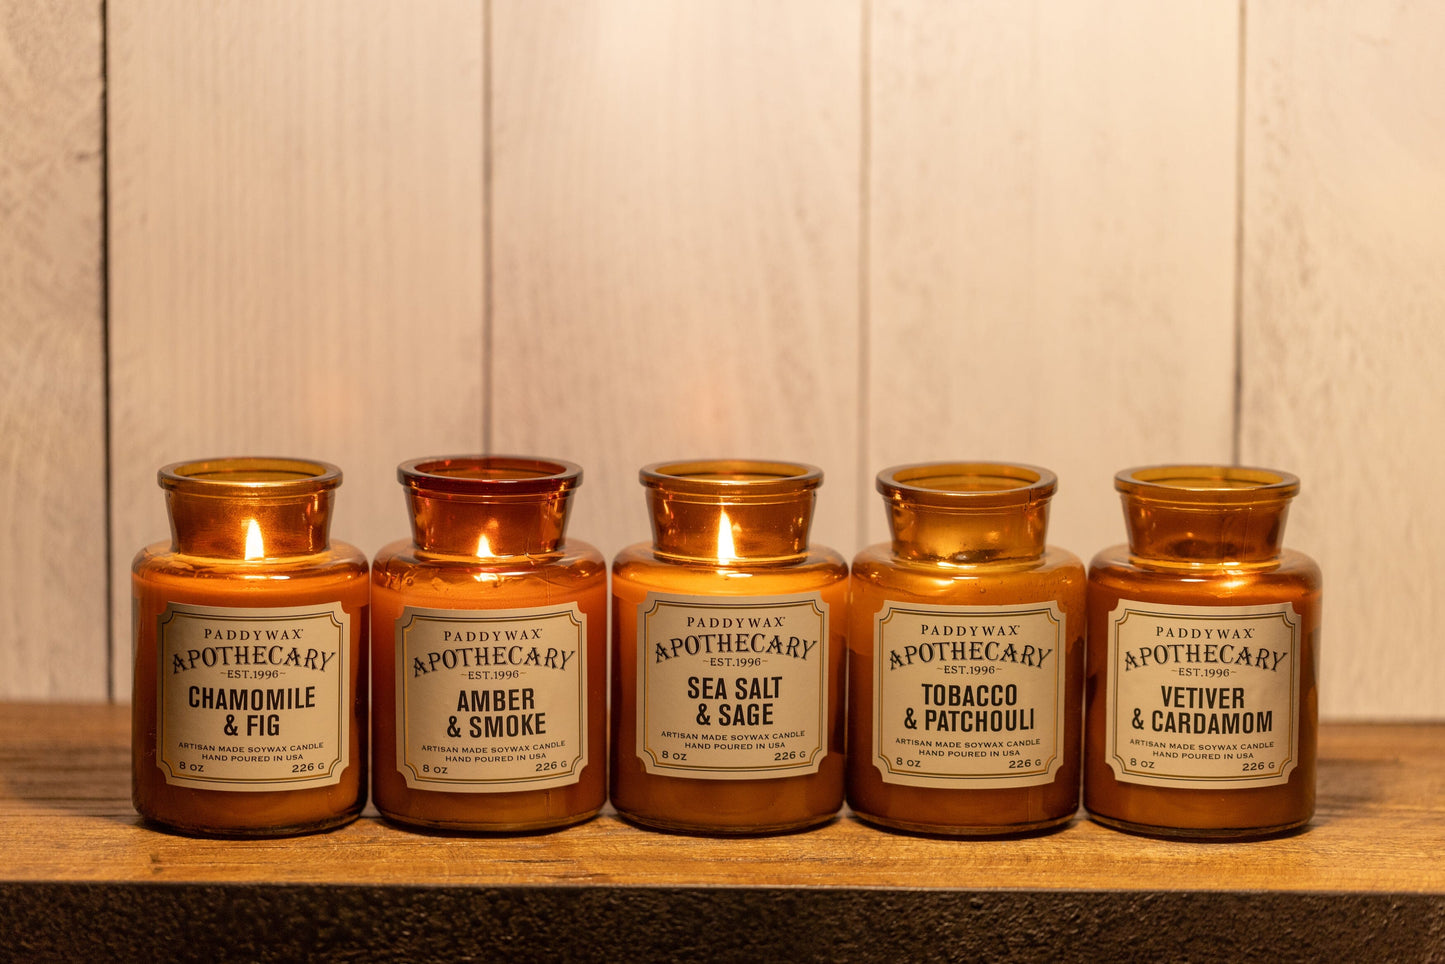 5 of the Apothecary candles in different fragrances, including Chamomile & Fig, on a wooden shelf